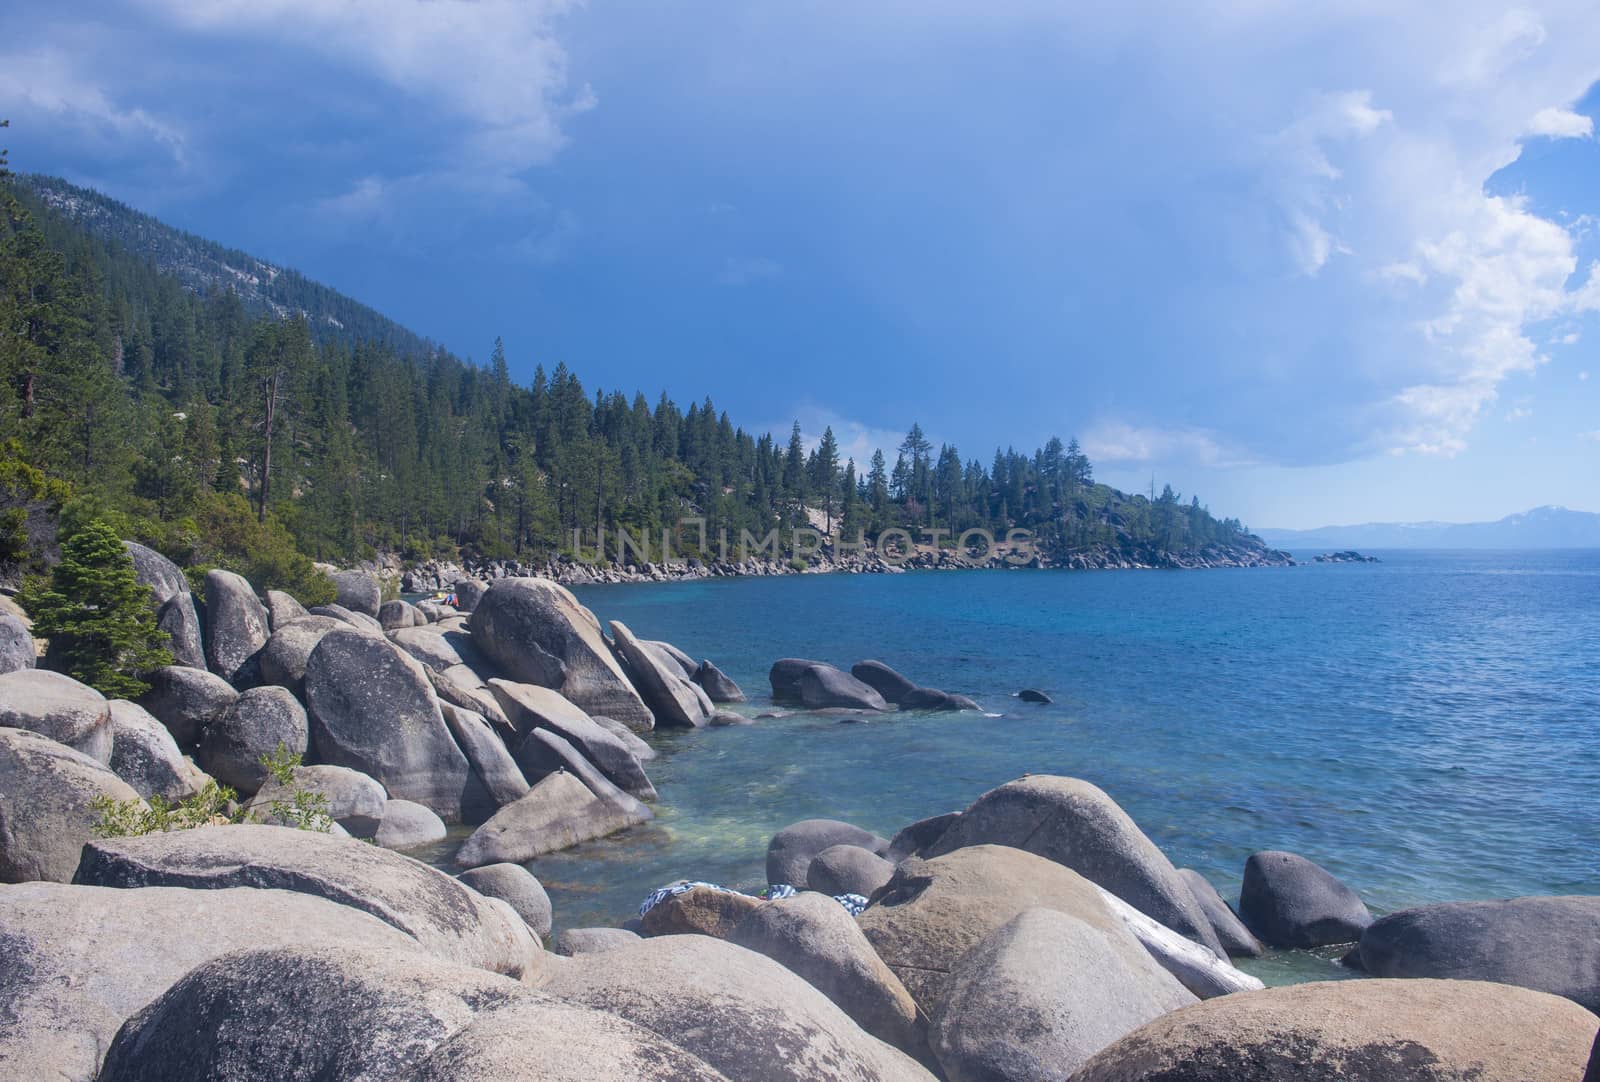 The shore of Lake Tahoe in Northern Nevada